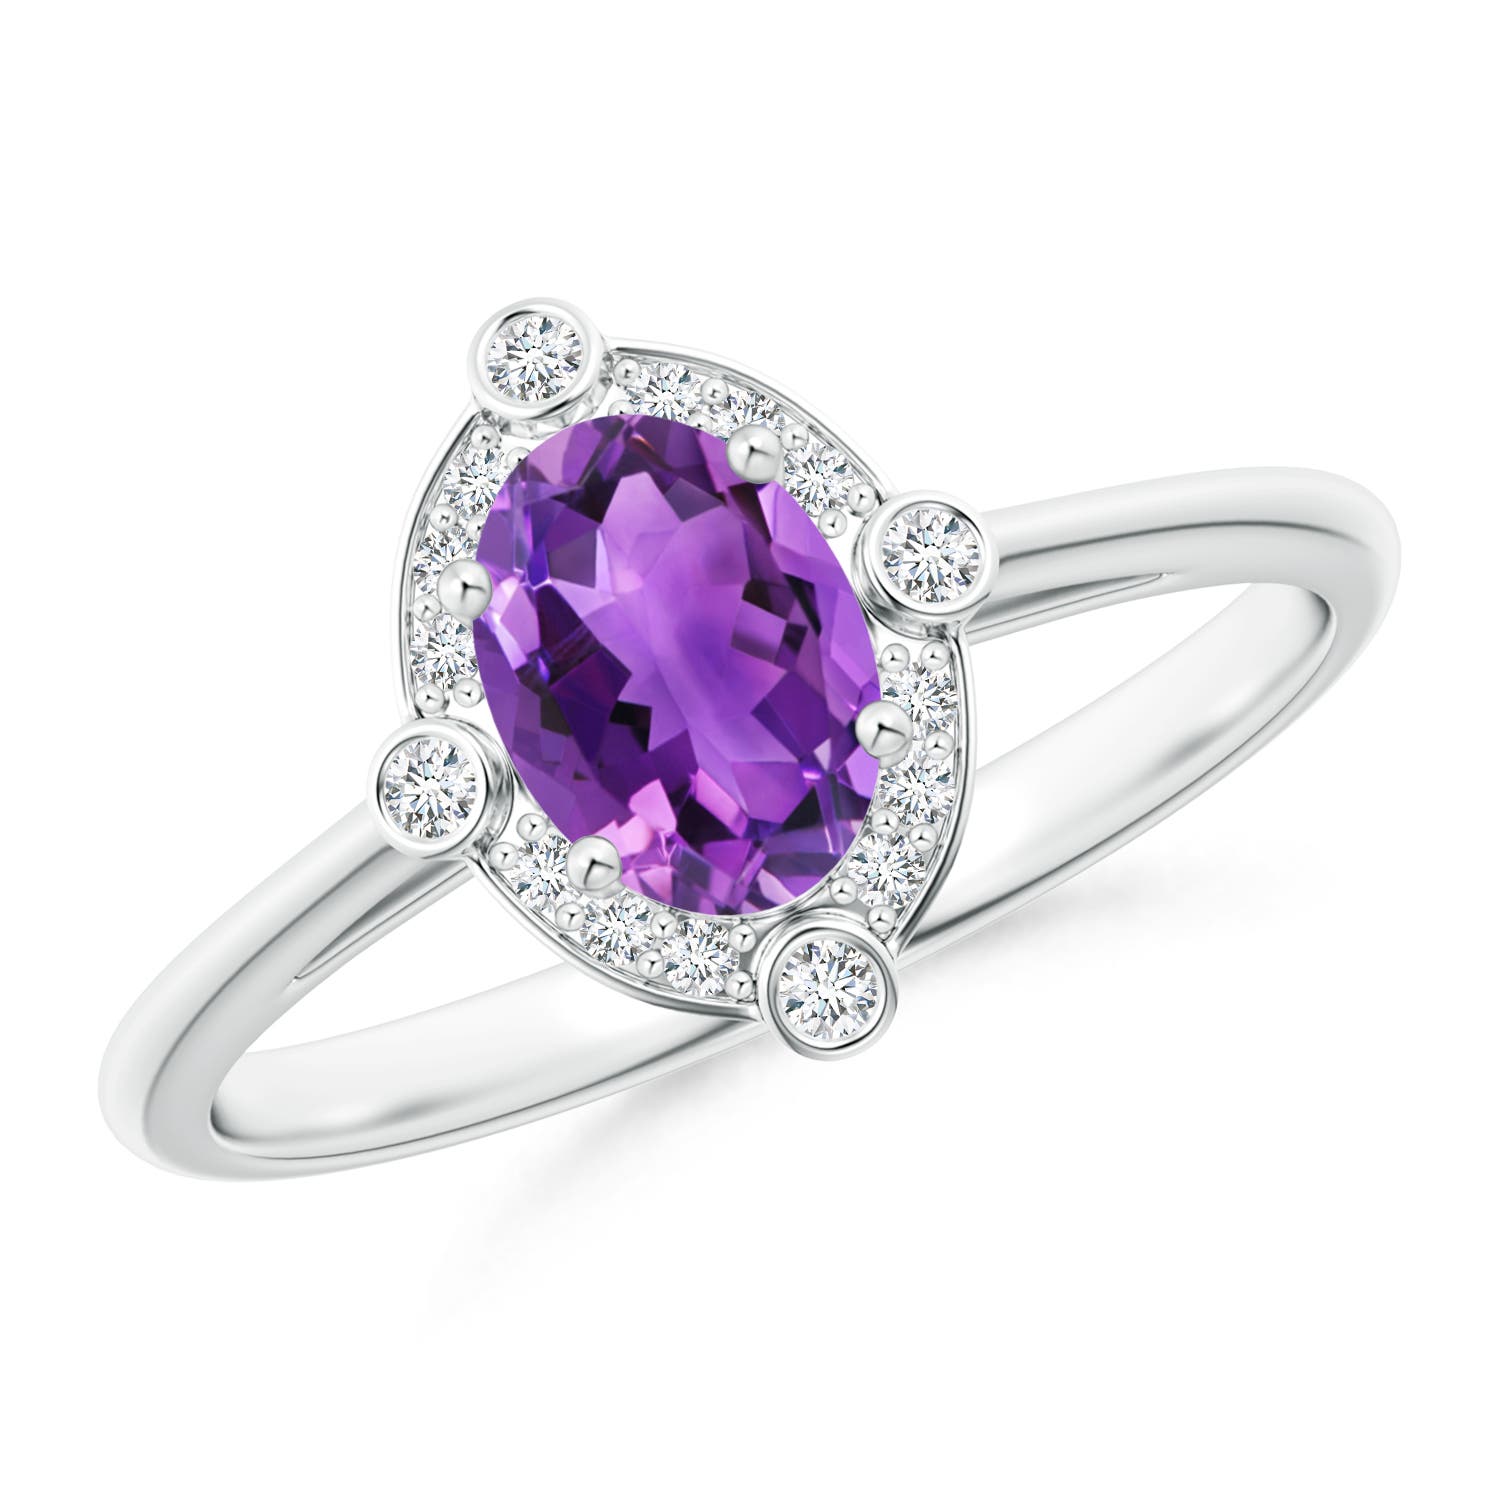 AAA - Amethyst / 0.82 CT / 14 KT White Gold